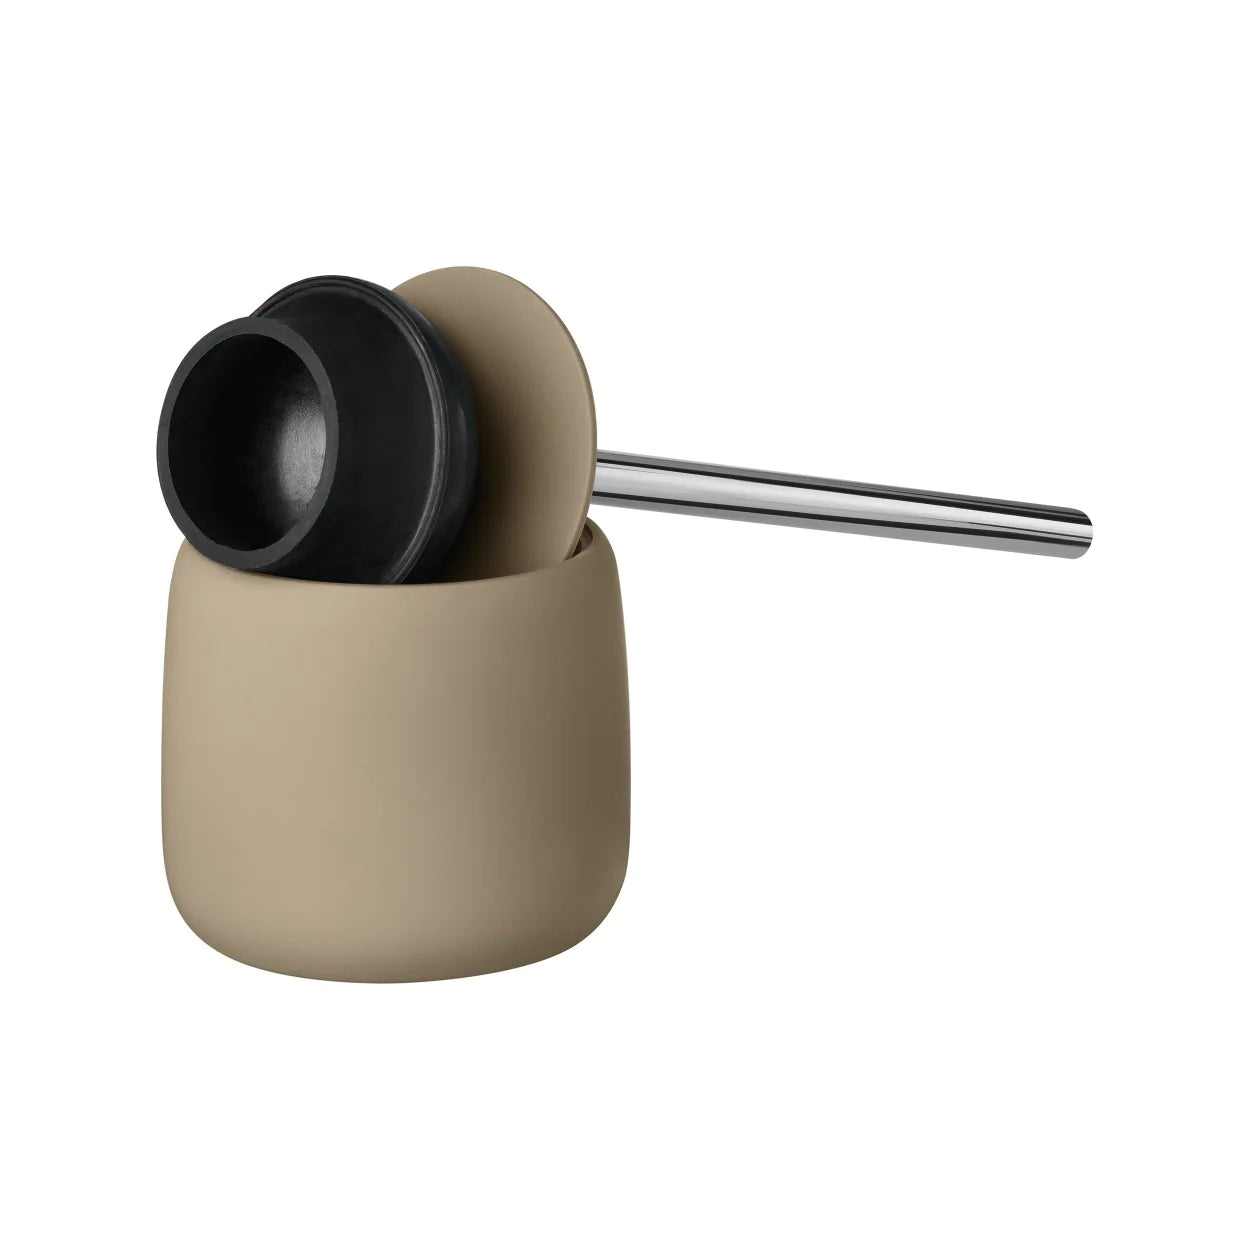 SONO Plunger And Decorative Holder